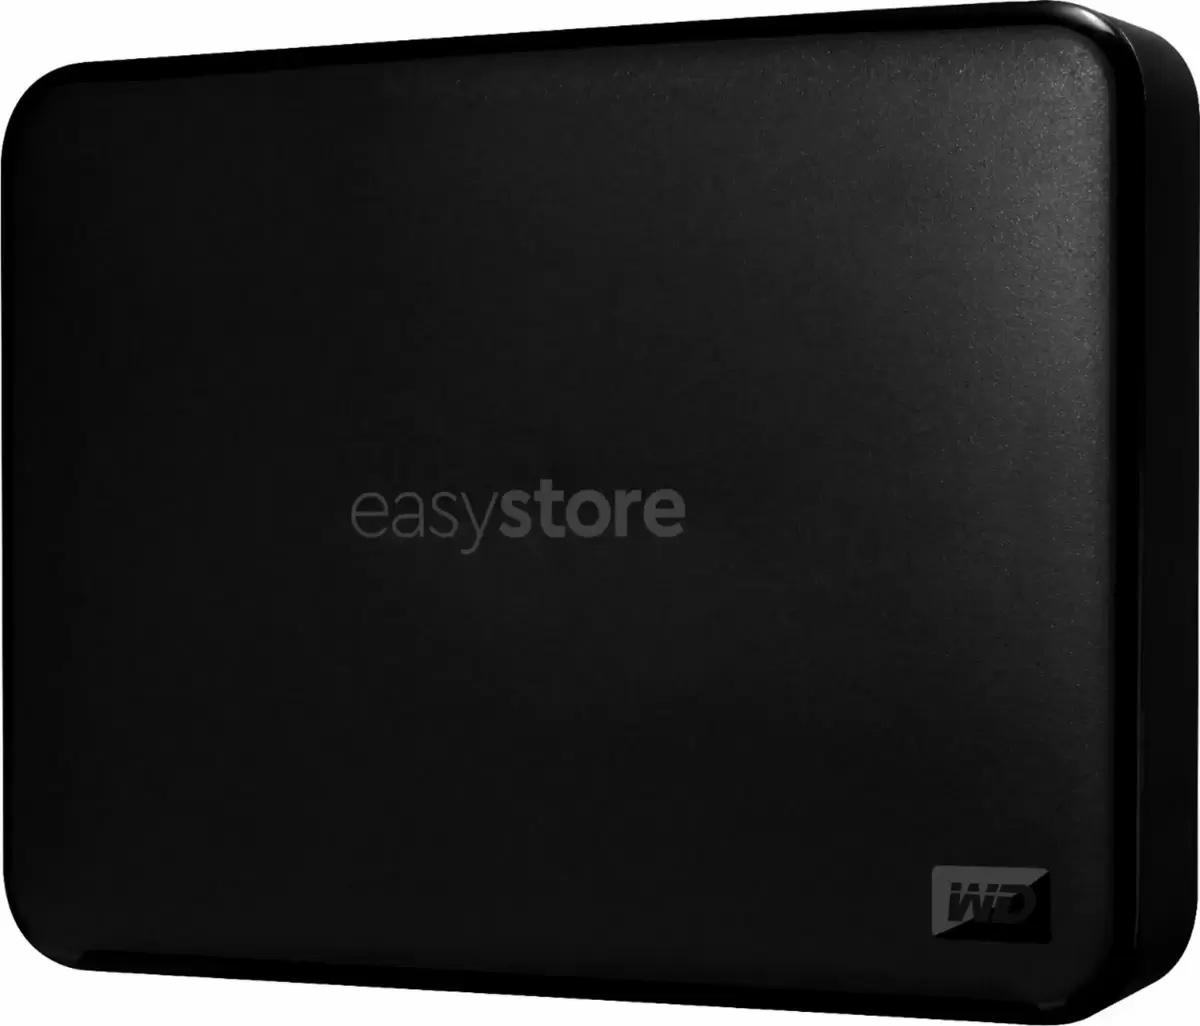 5TB WD Easystore External USB 3.0 Portable Hard Drive for $99.99 Shipped